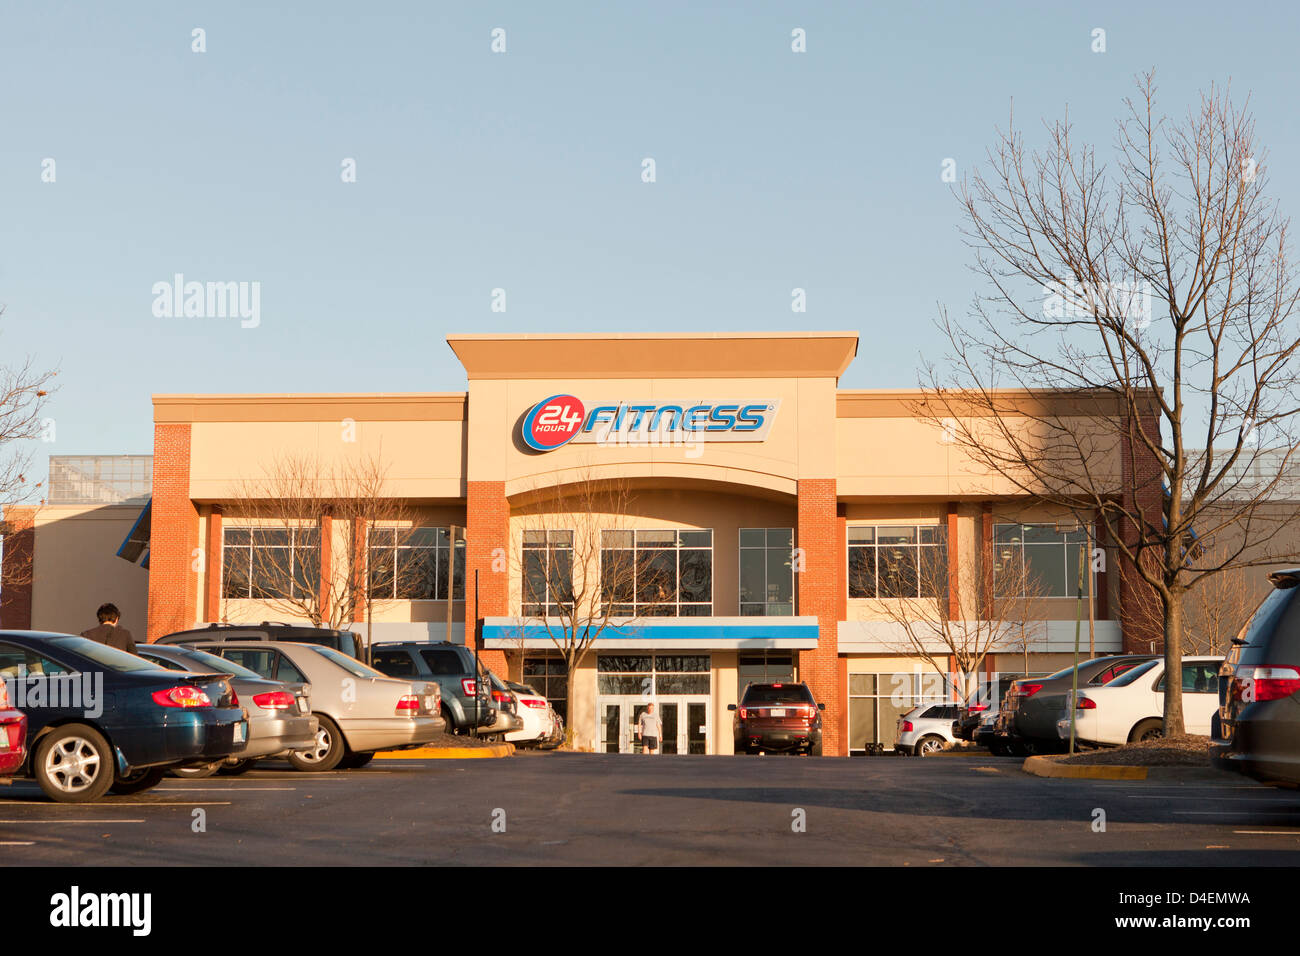 24 Hour Fitness storefront Stock Photo